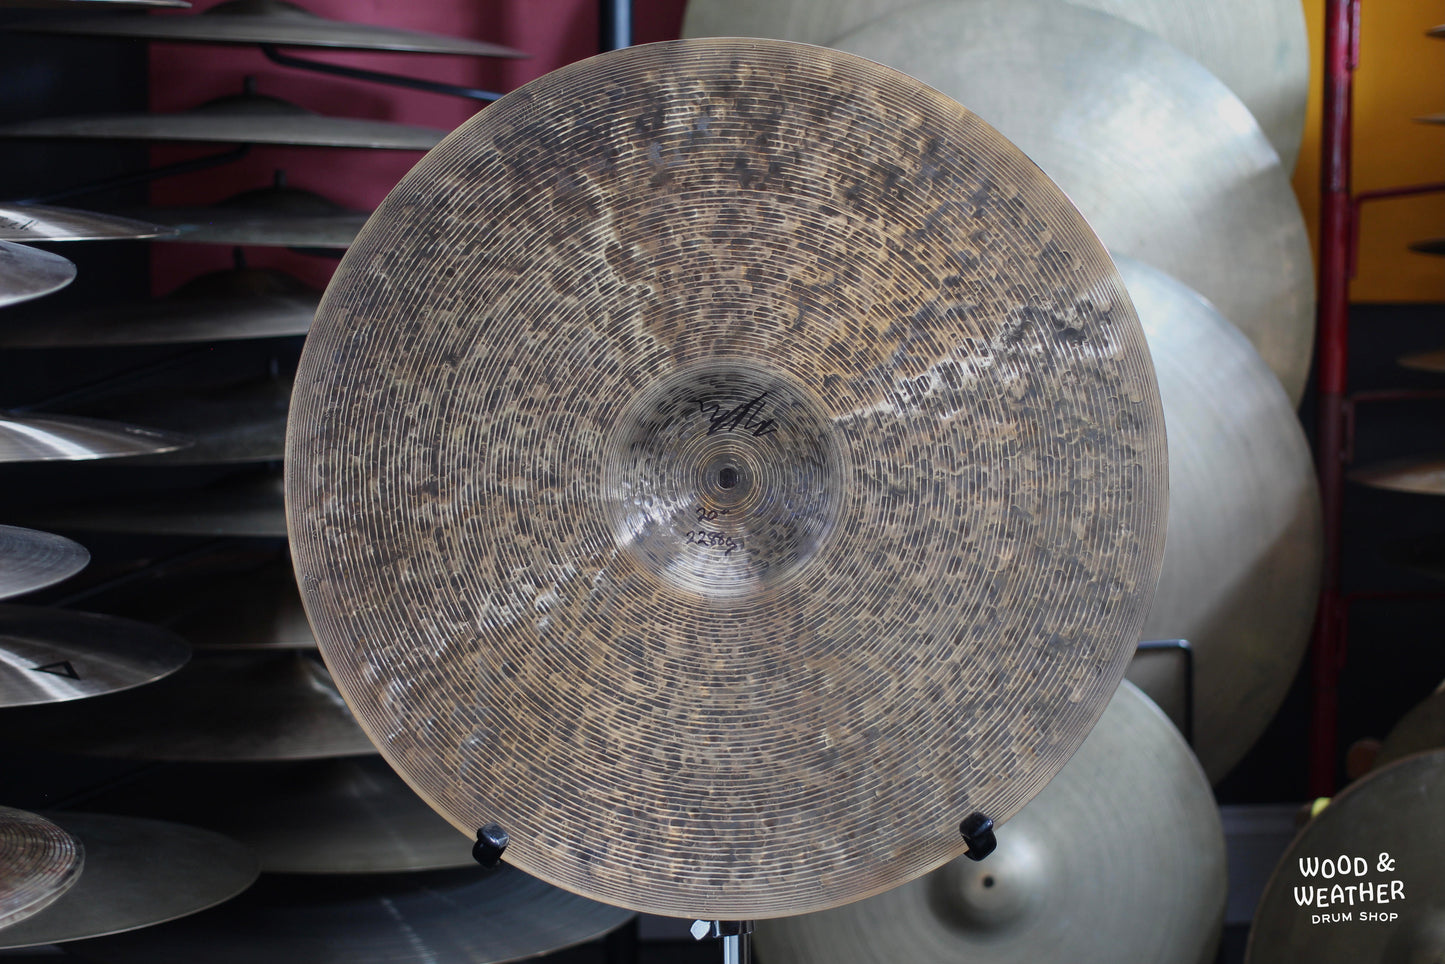 Byrne 20" Signature Series Ride Cymbal 2288g